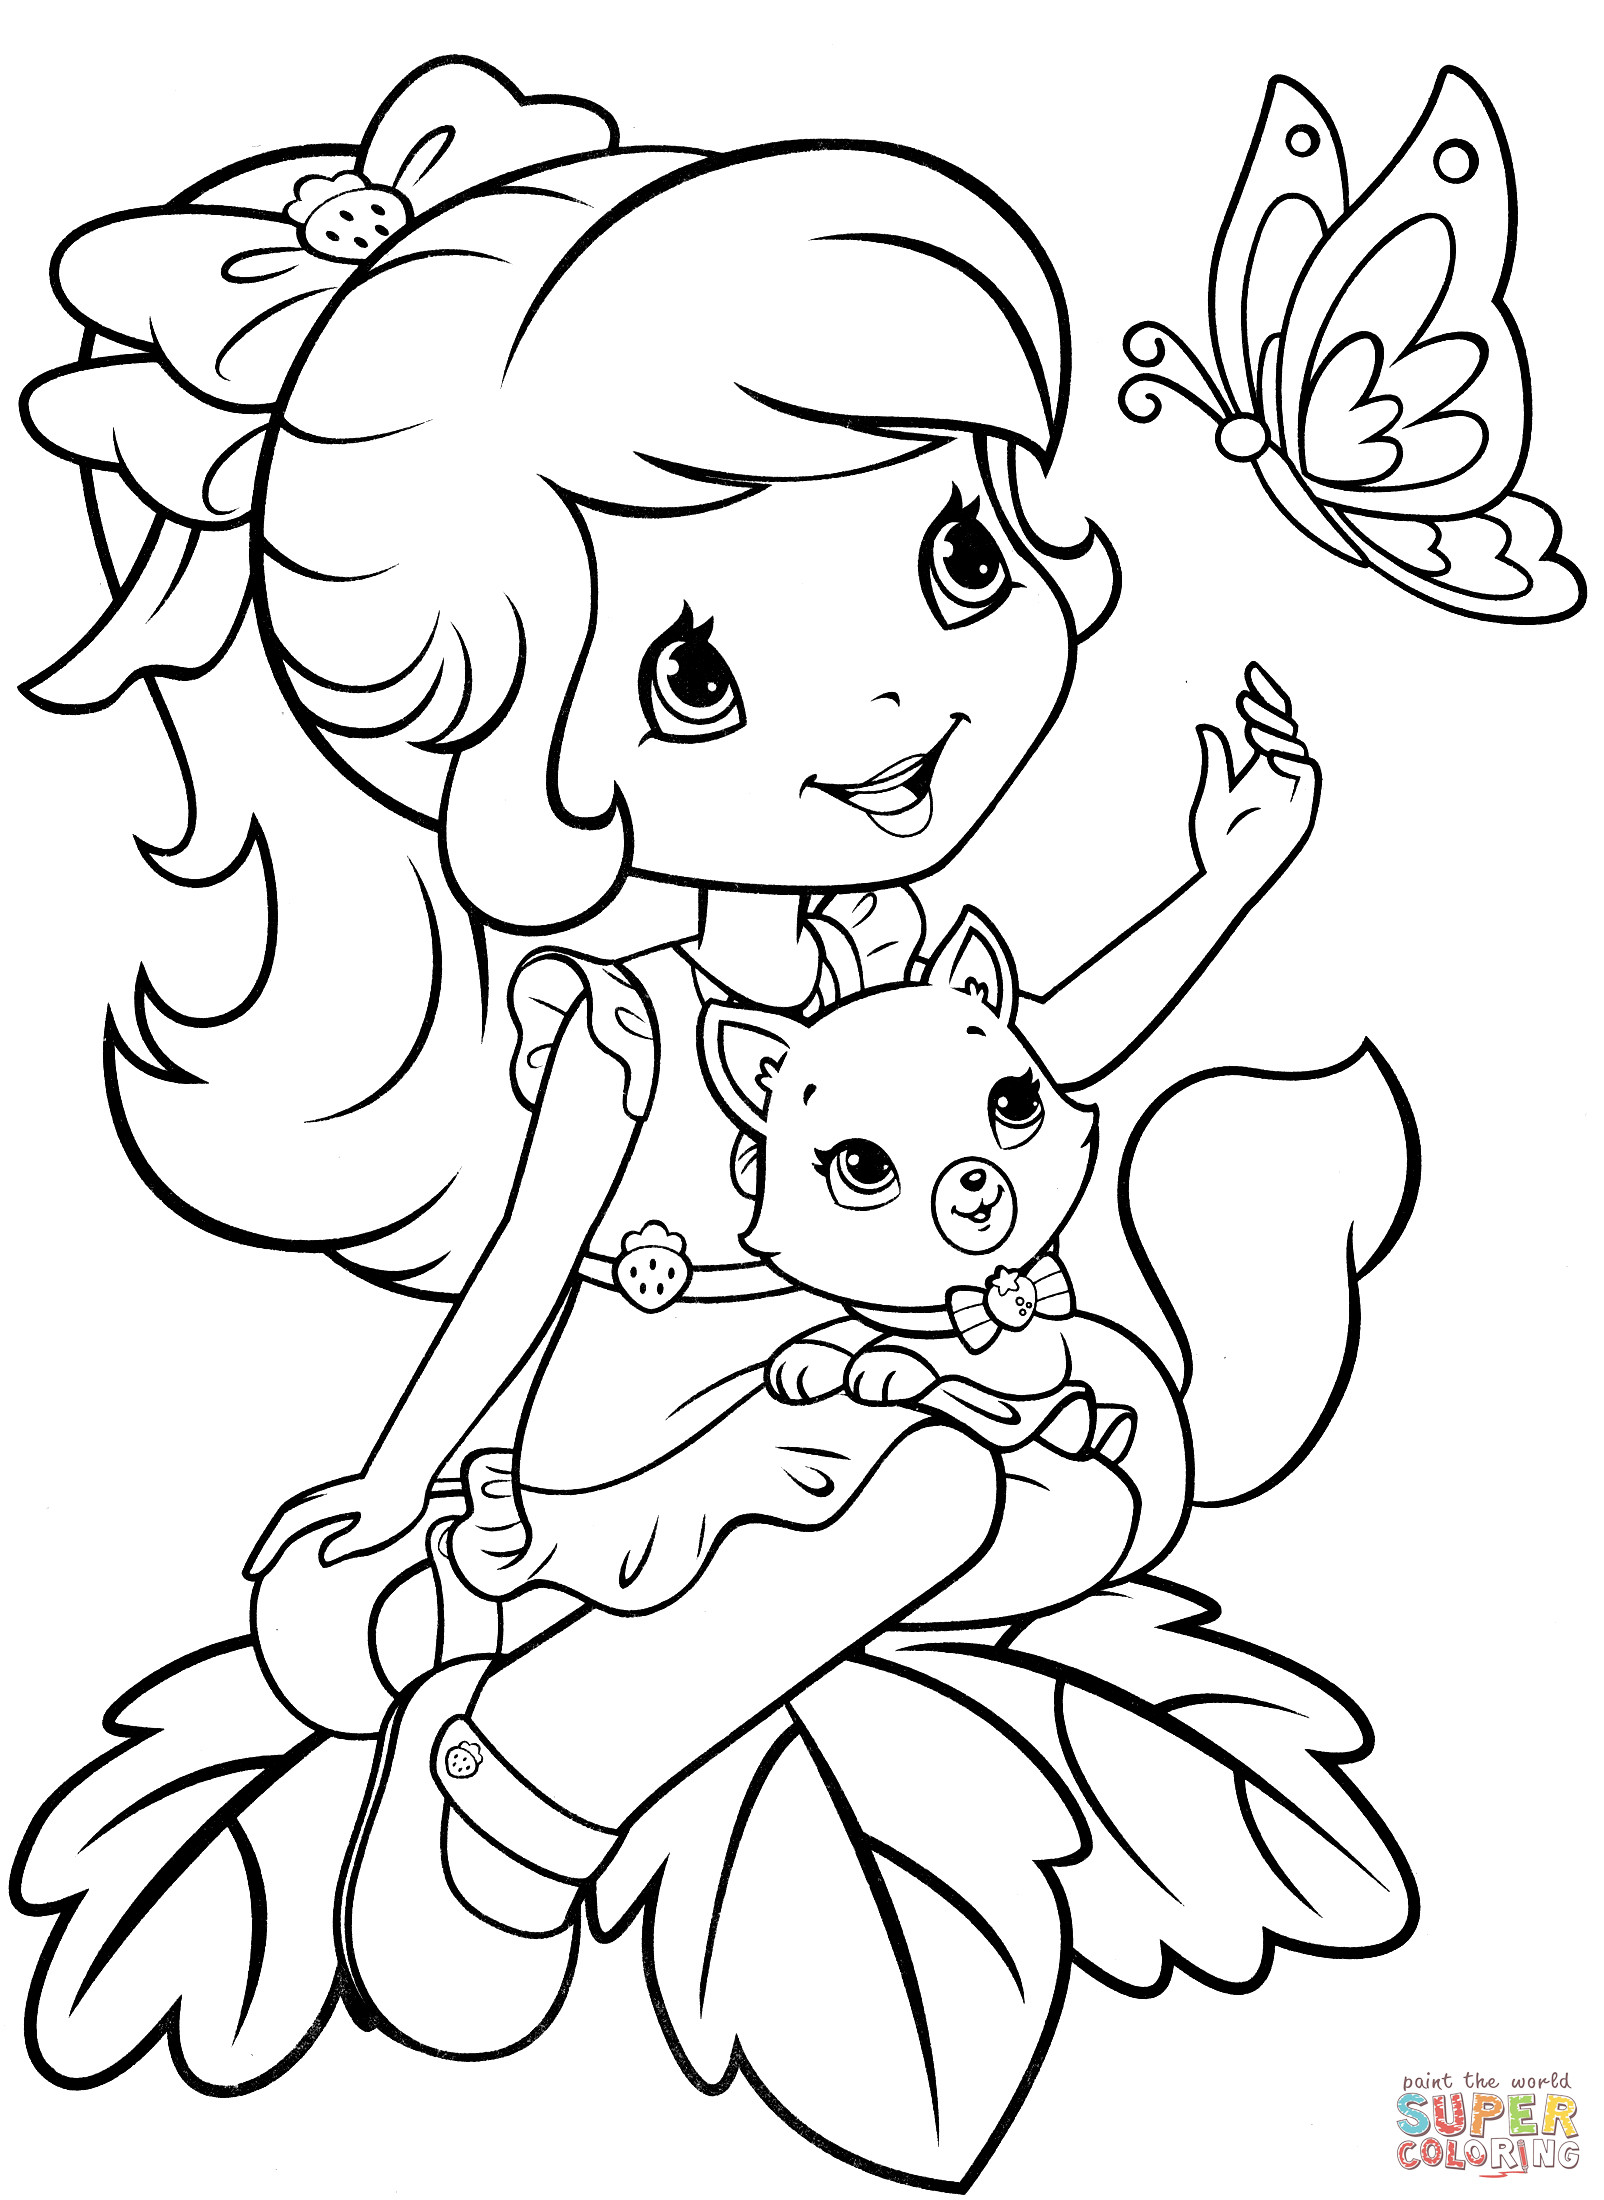 Strawberry Shortcake Printable Coloring Pages
 Strawberry Shortcake with Custard and Butterfly coloring